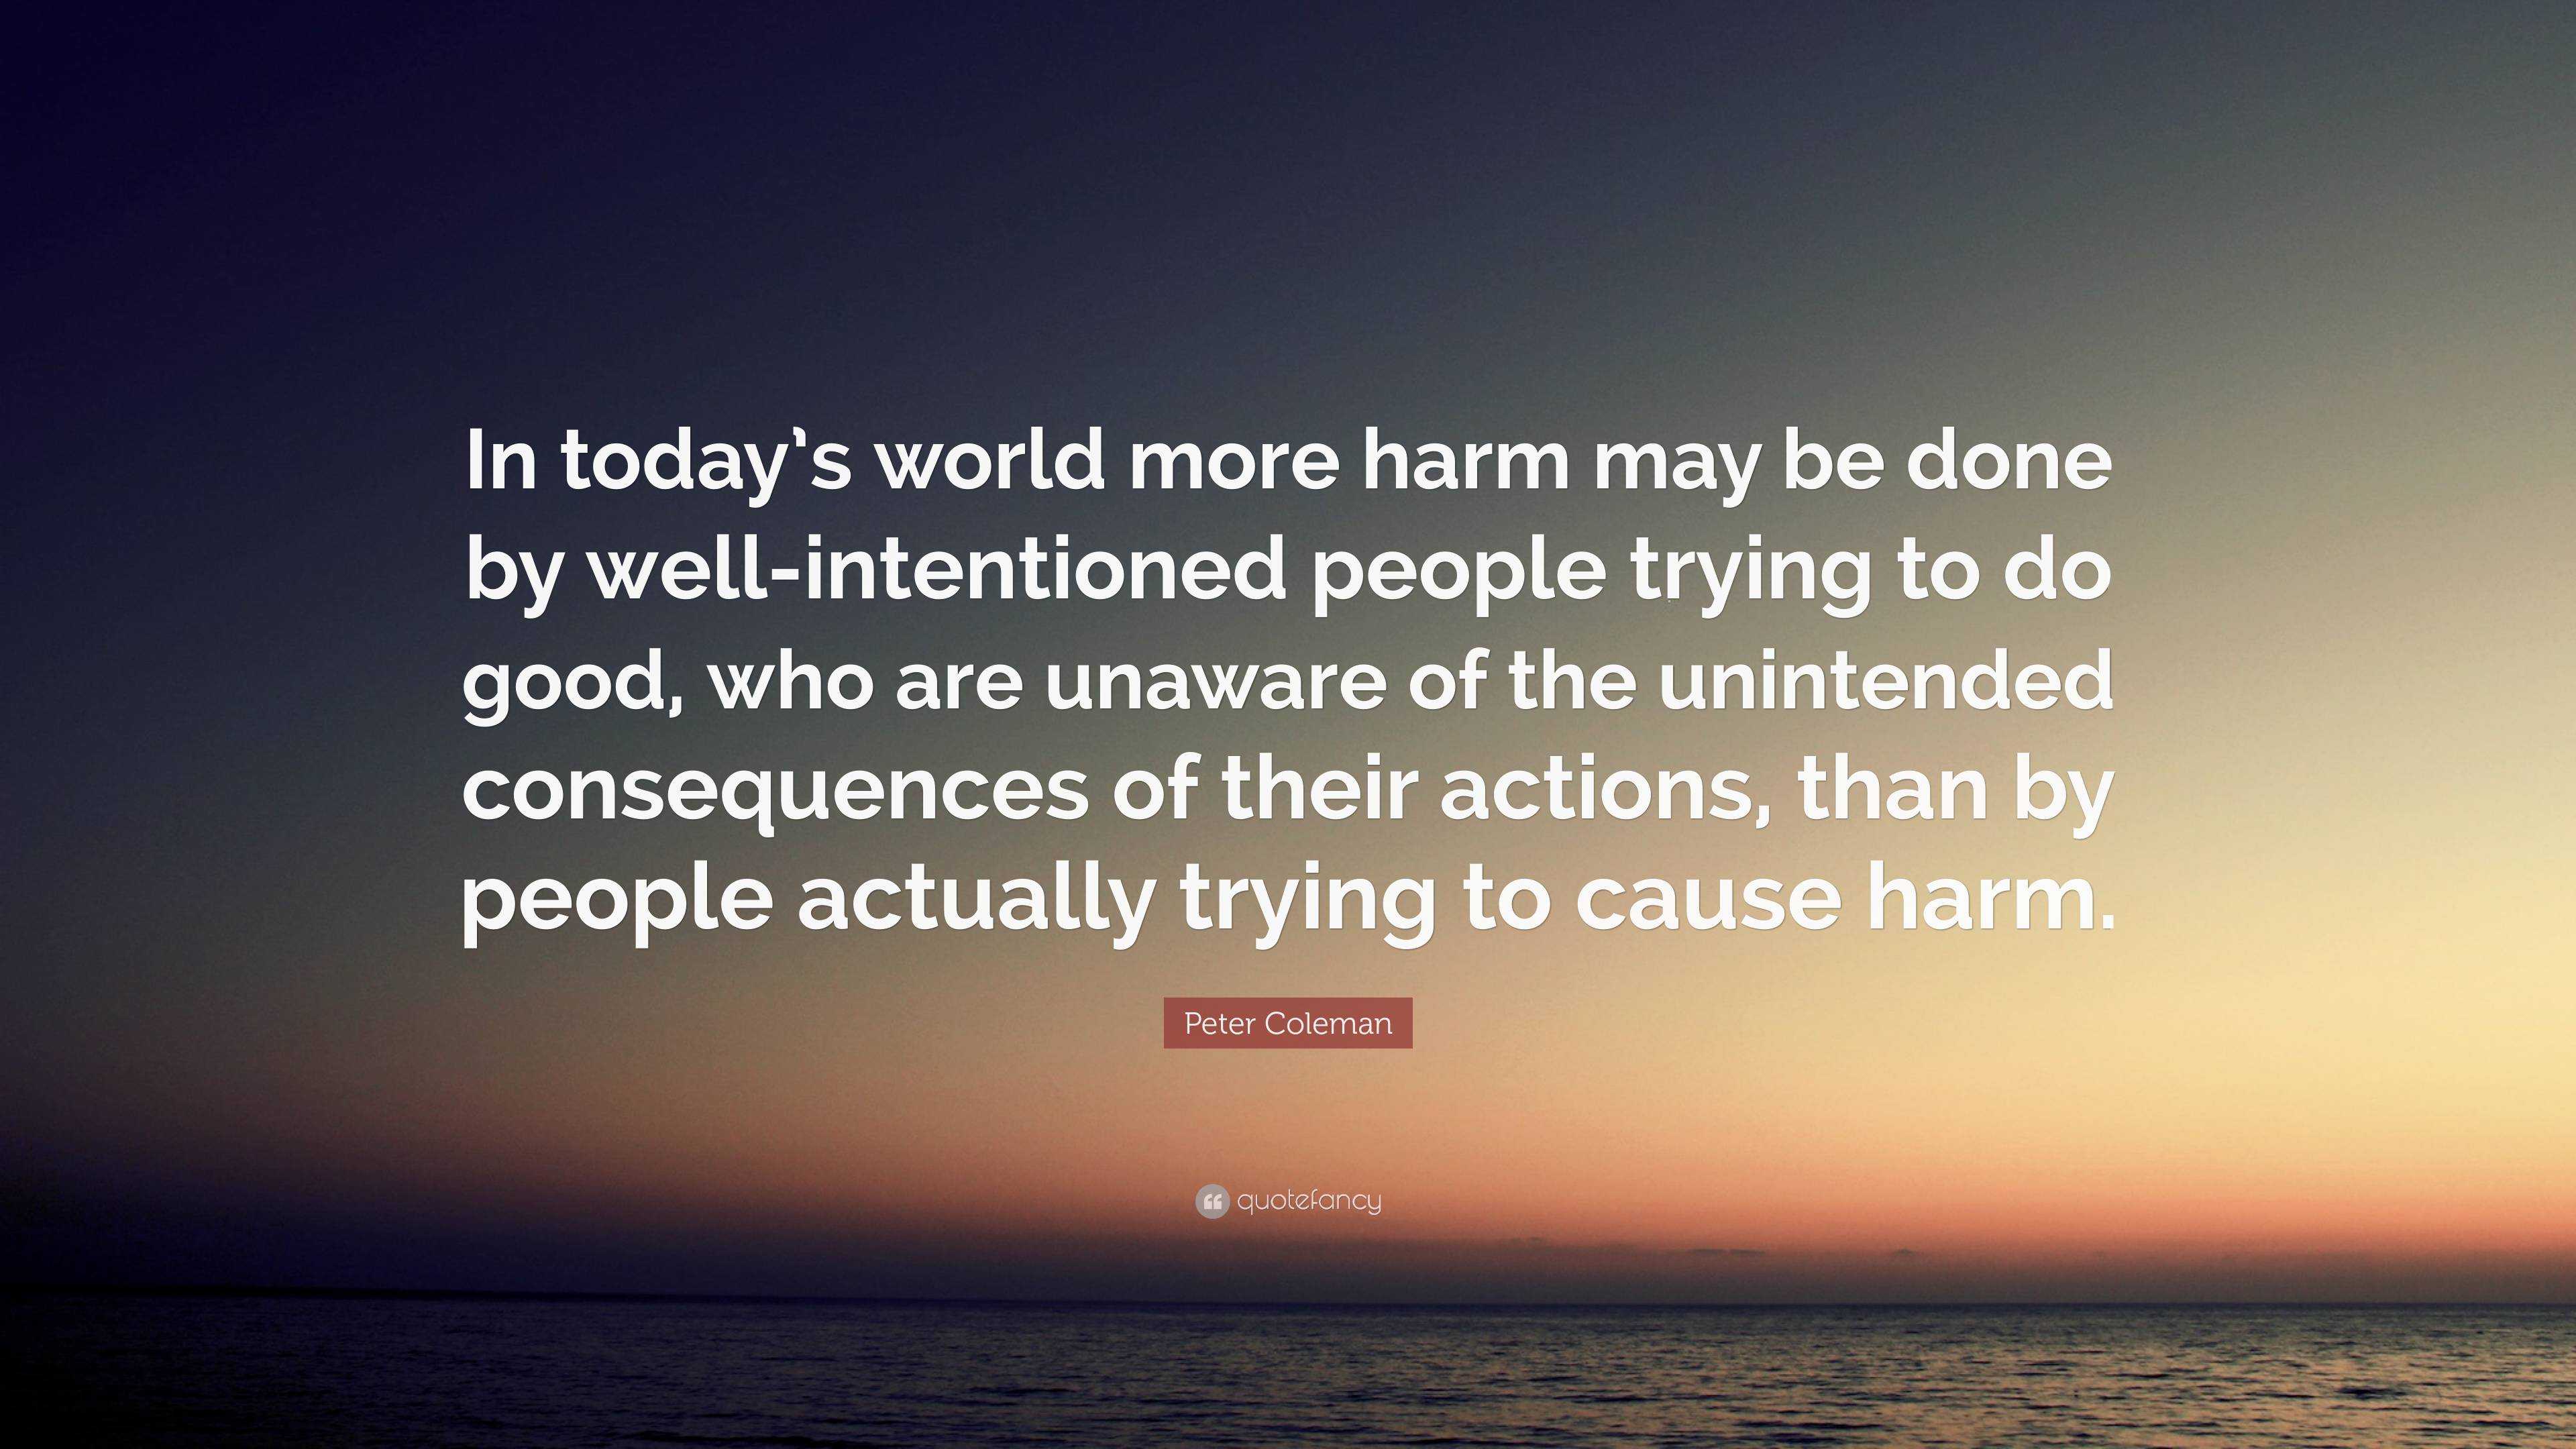 Peter Coleman Quote: “In today’s world more harm may be done by well ...